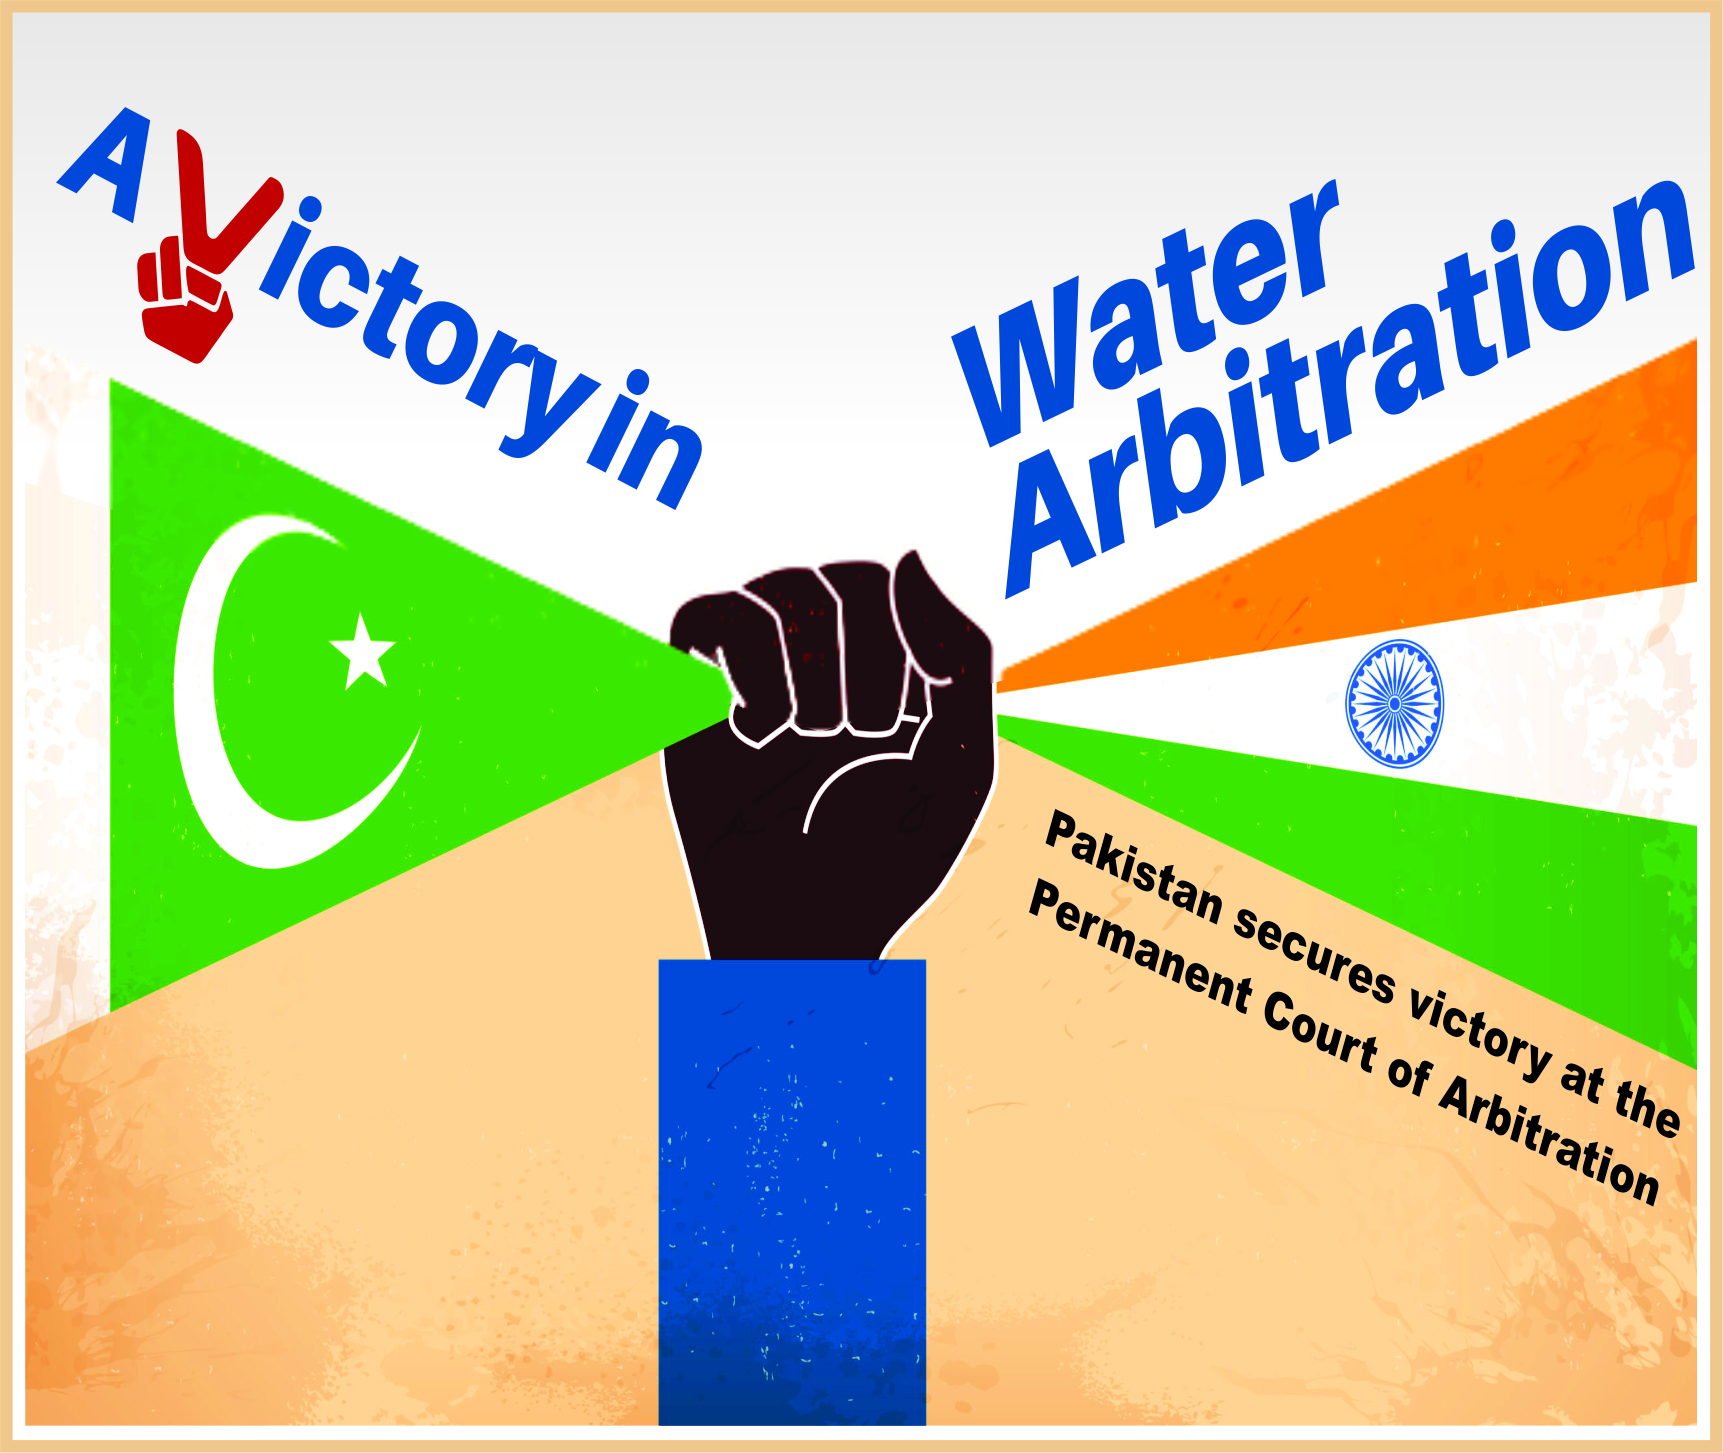 You are currently viewing A Victory in Water Arbitration